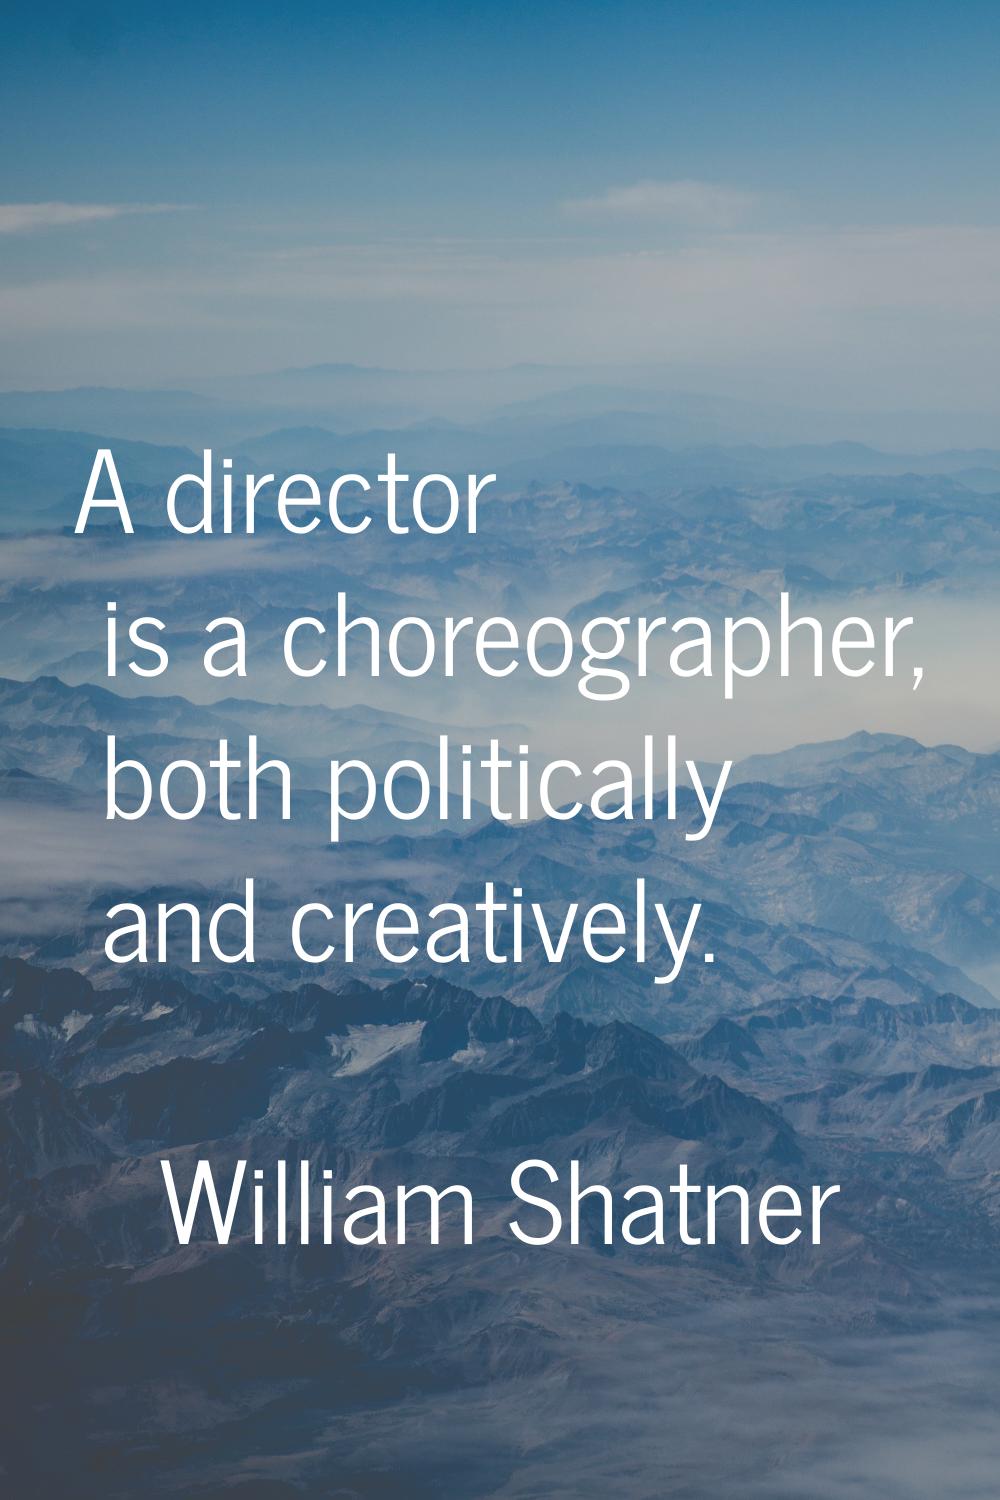 A director is a choreographer, both politically and creatively.